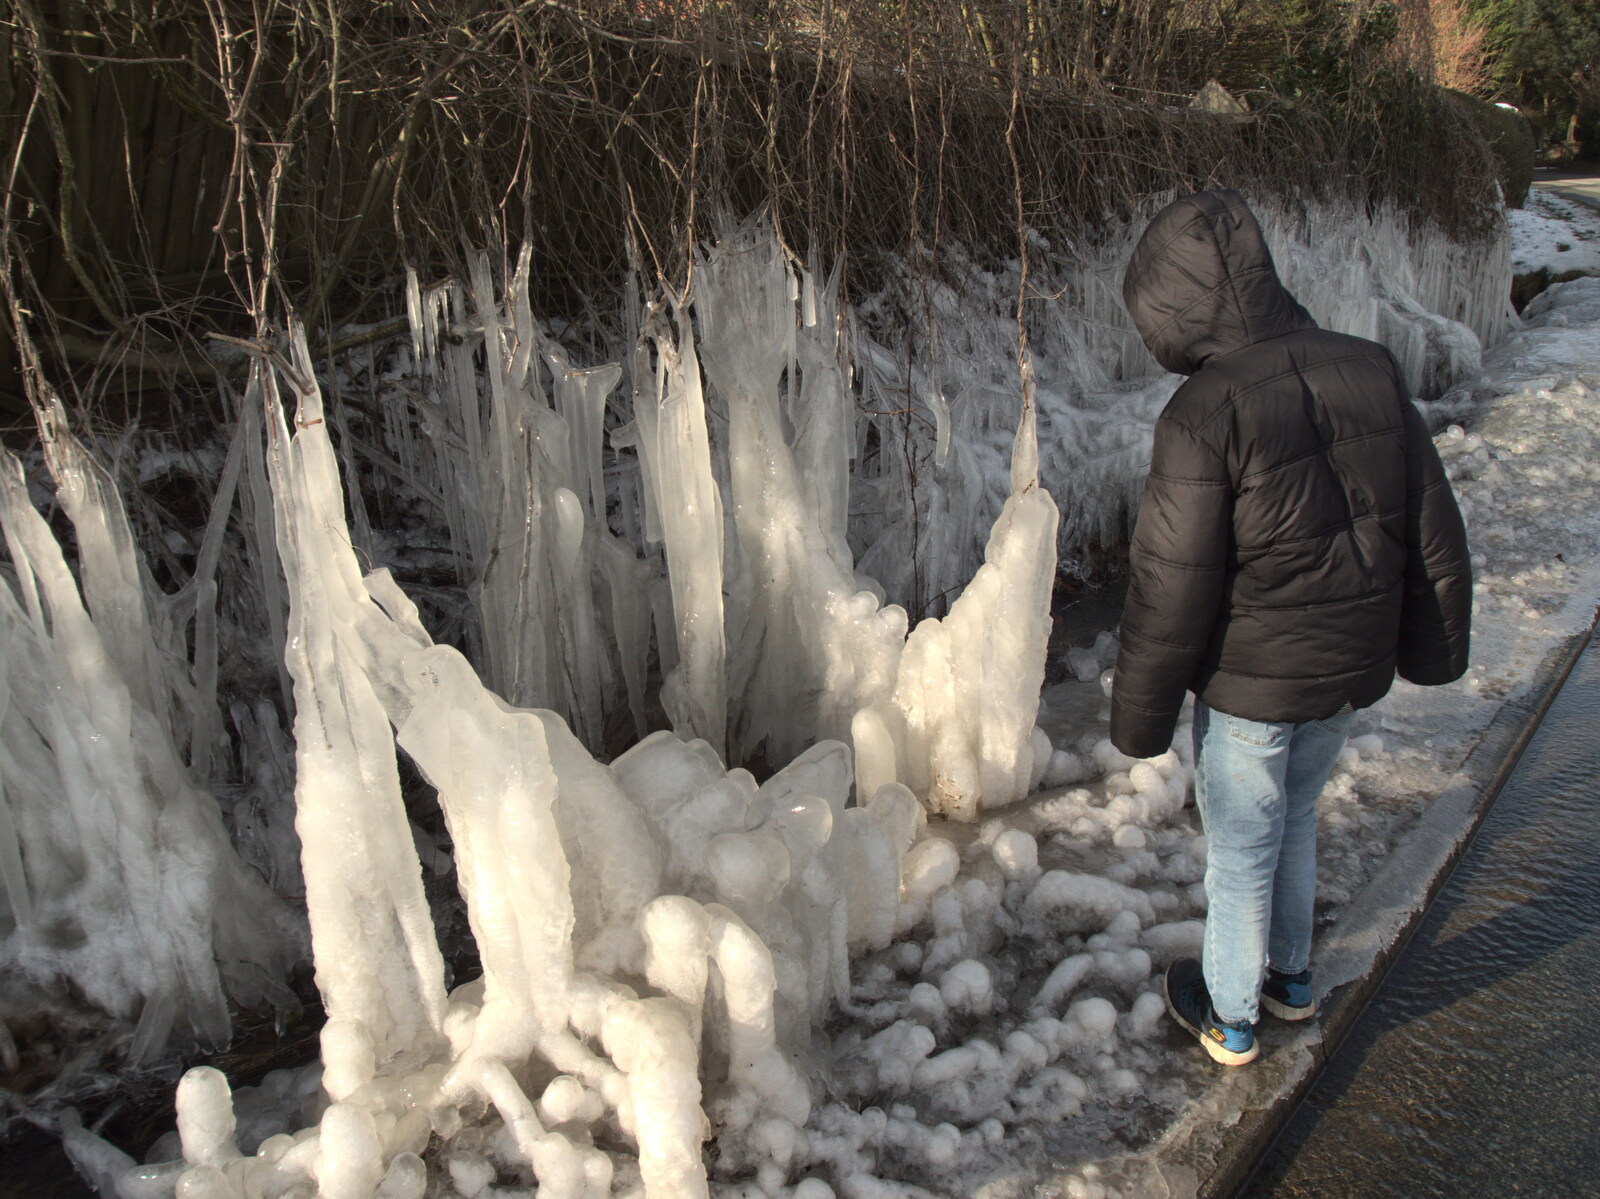 Looking at the ice from Derelict Infants School and Ice Sculptures, Diss and Palgrave, Norfolk and Suffolk - 13th February 2021